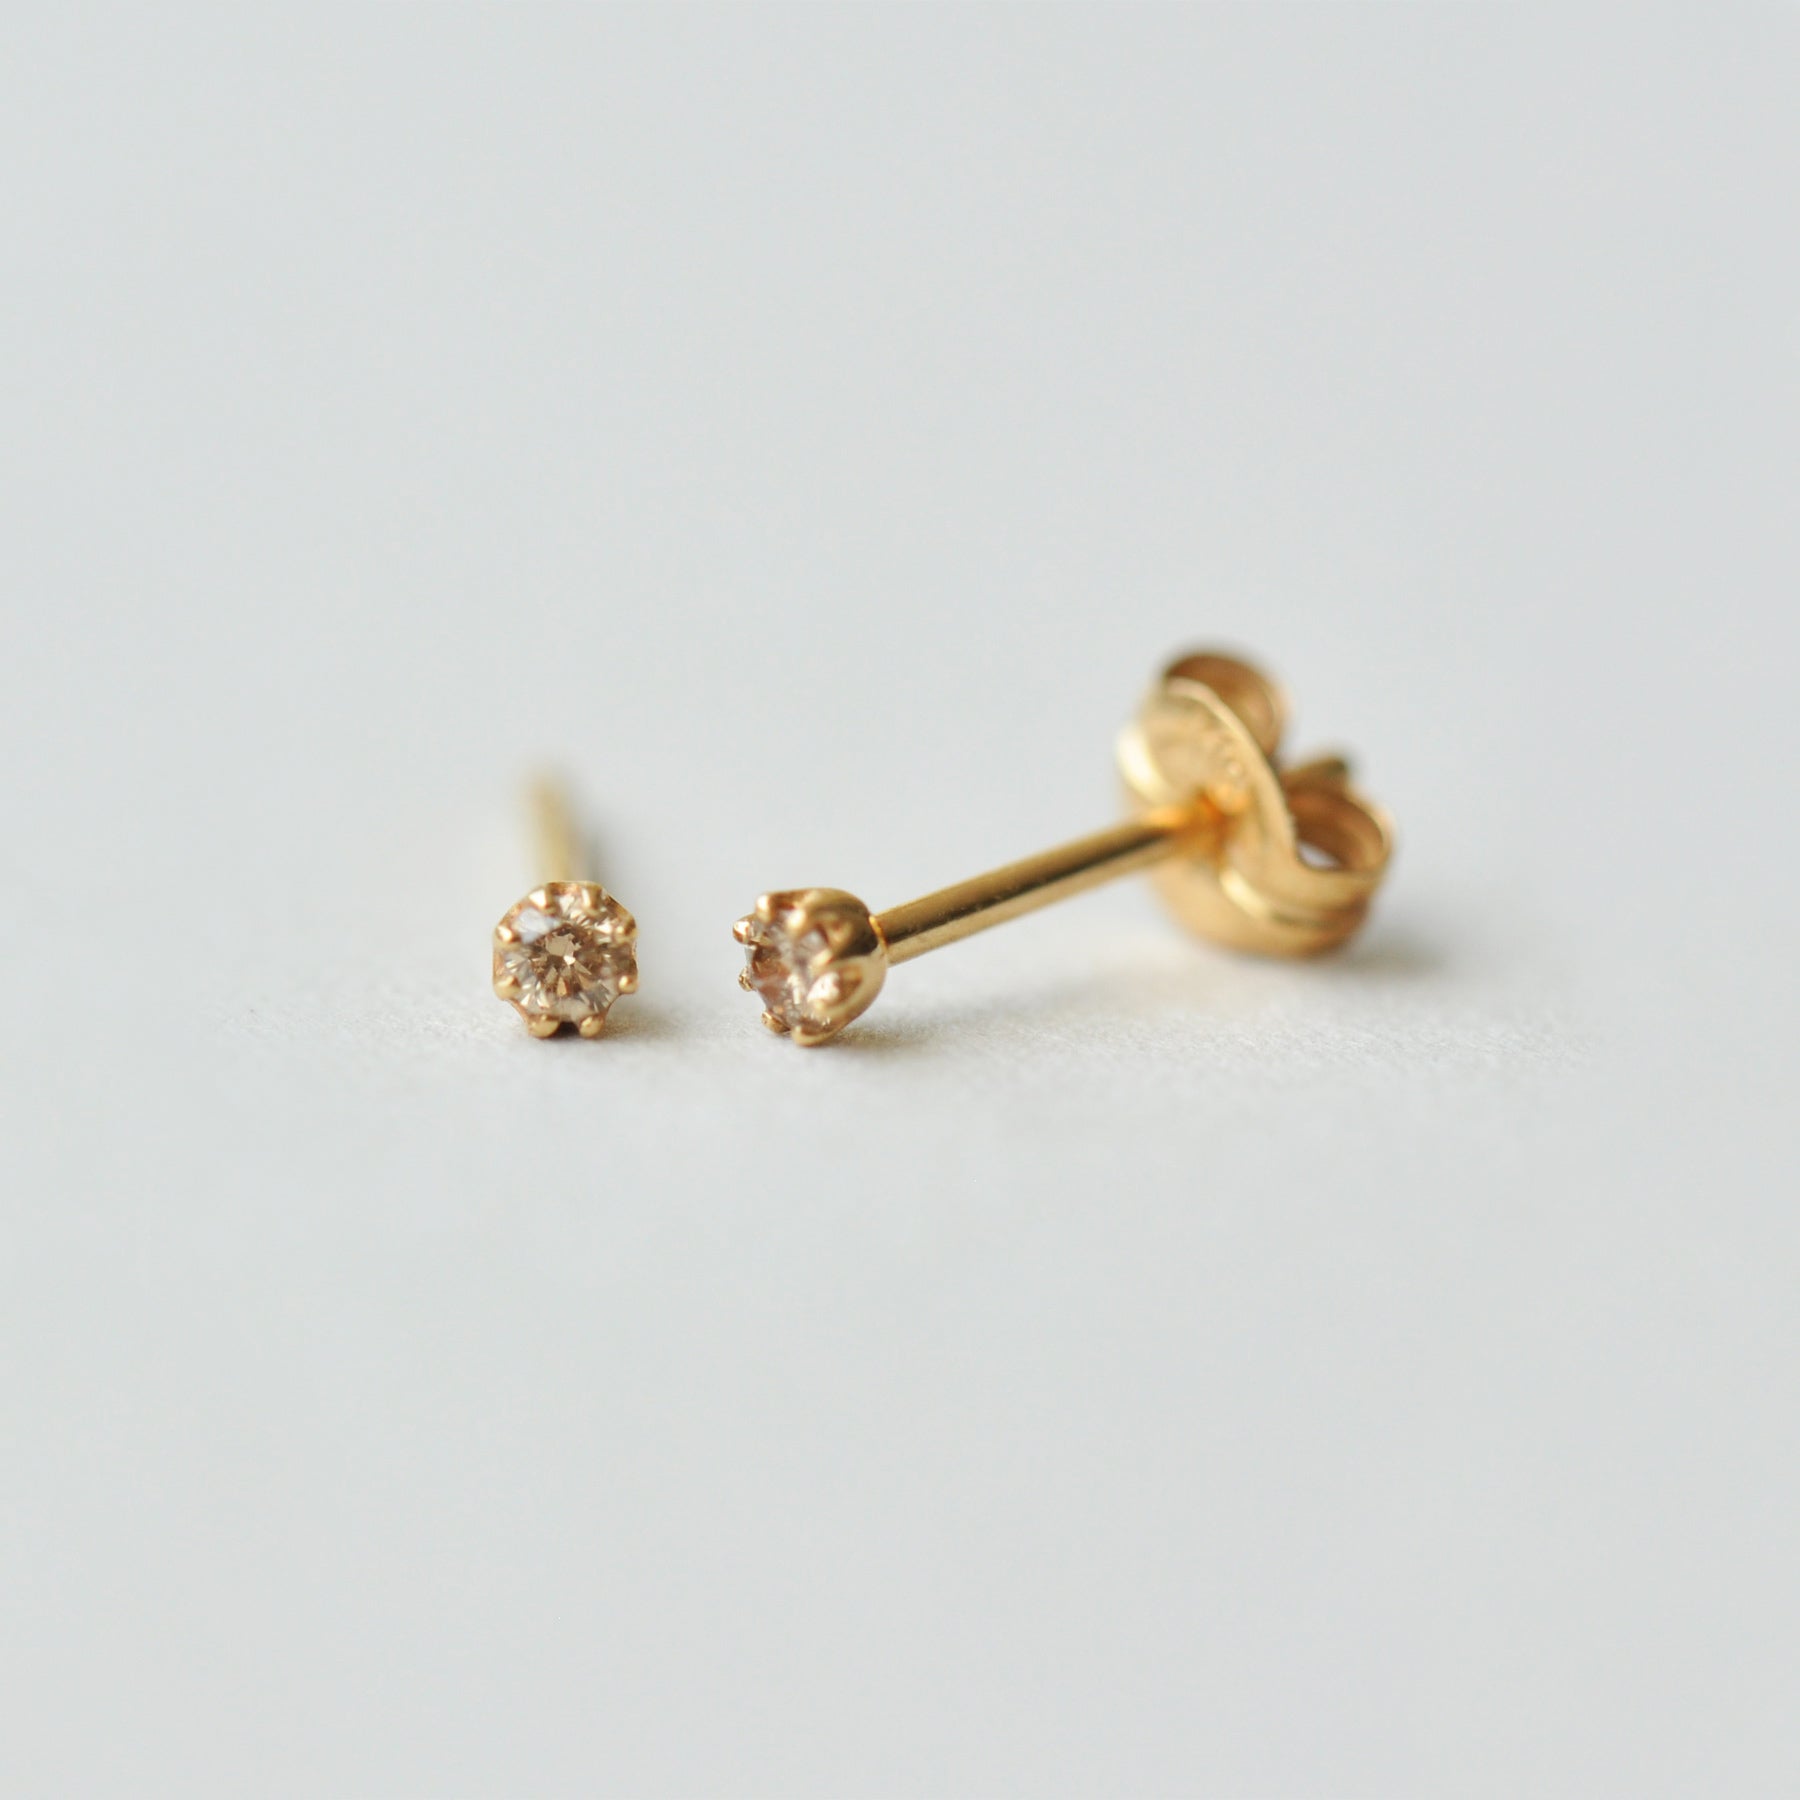 [Second Earrings] 18K Yellow Gold Brown Diamond Earrings - Product Image